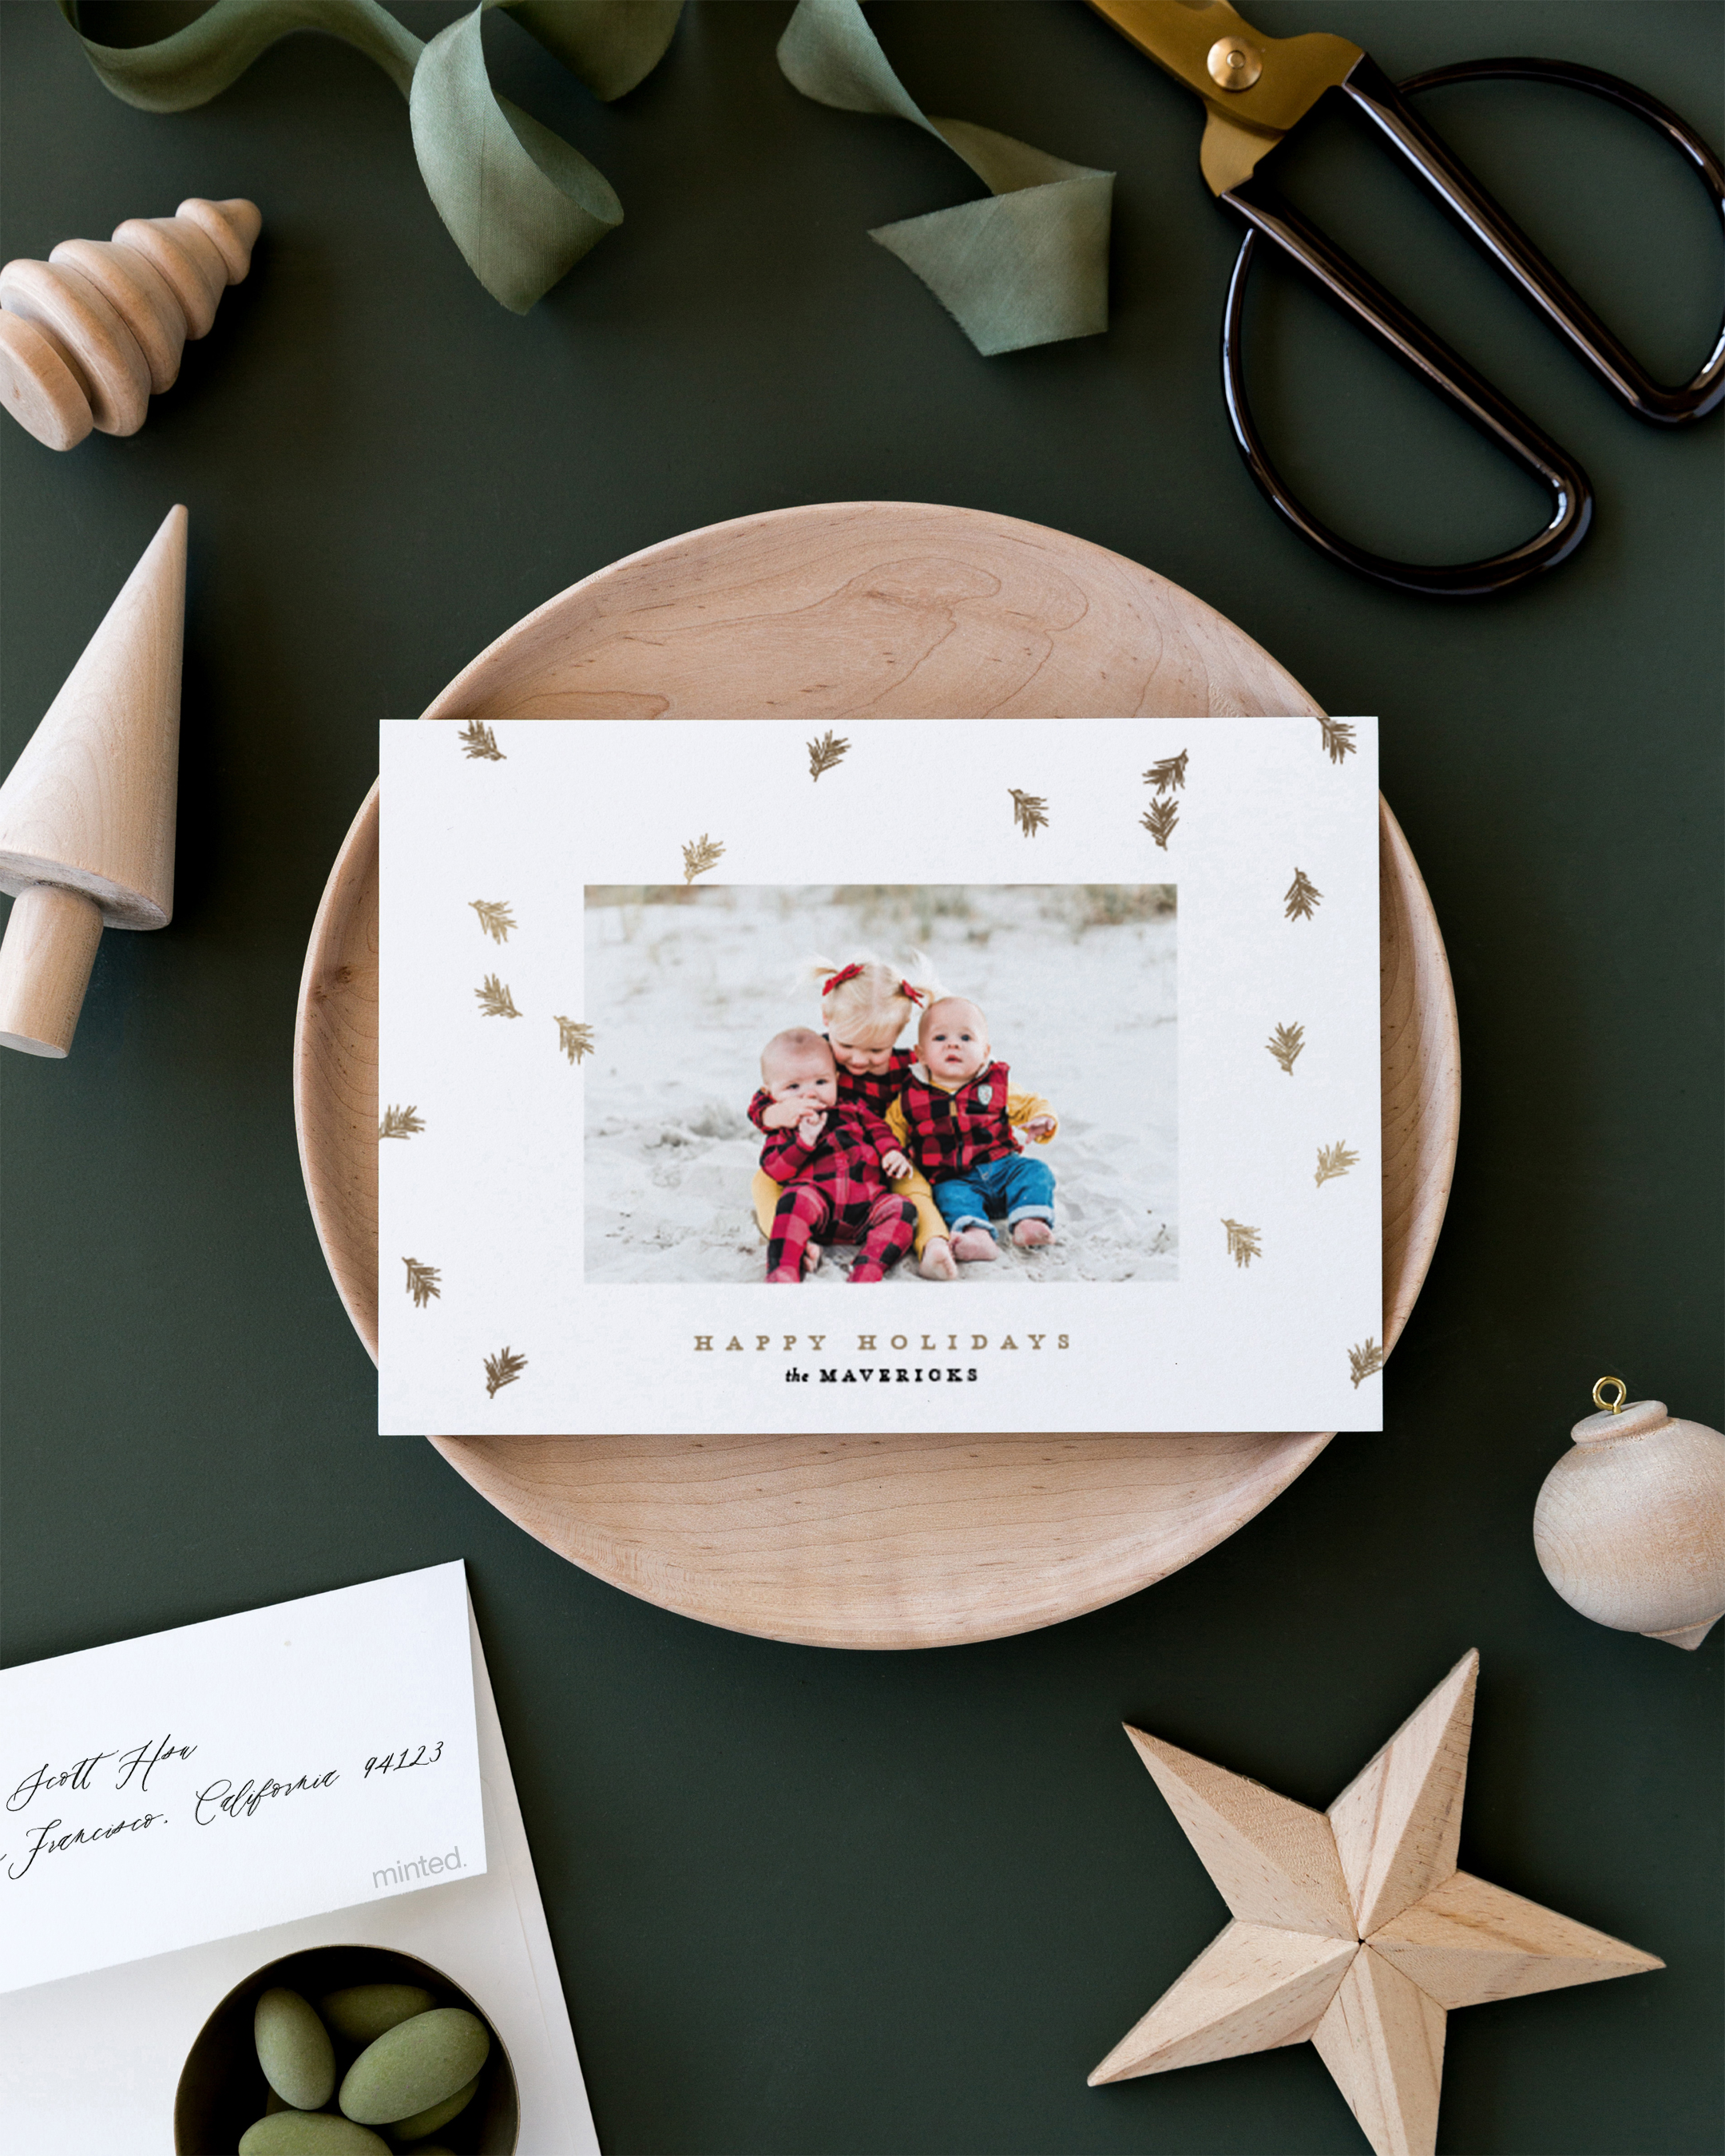 Kimberly FitzSimons + Minted 2018 Holiday Collection